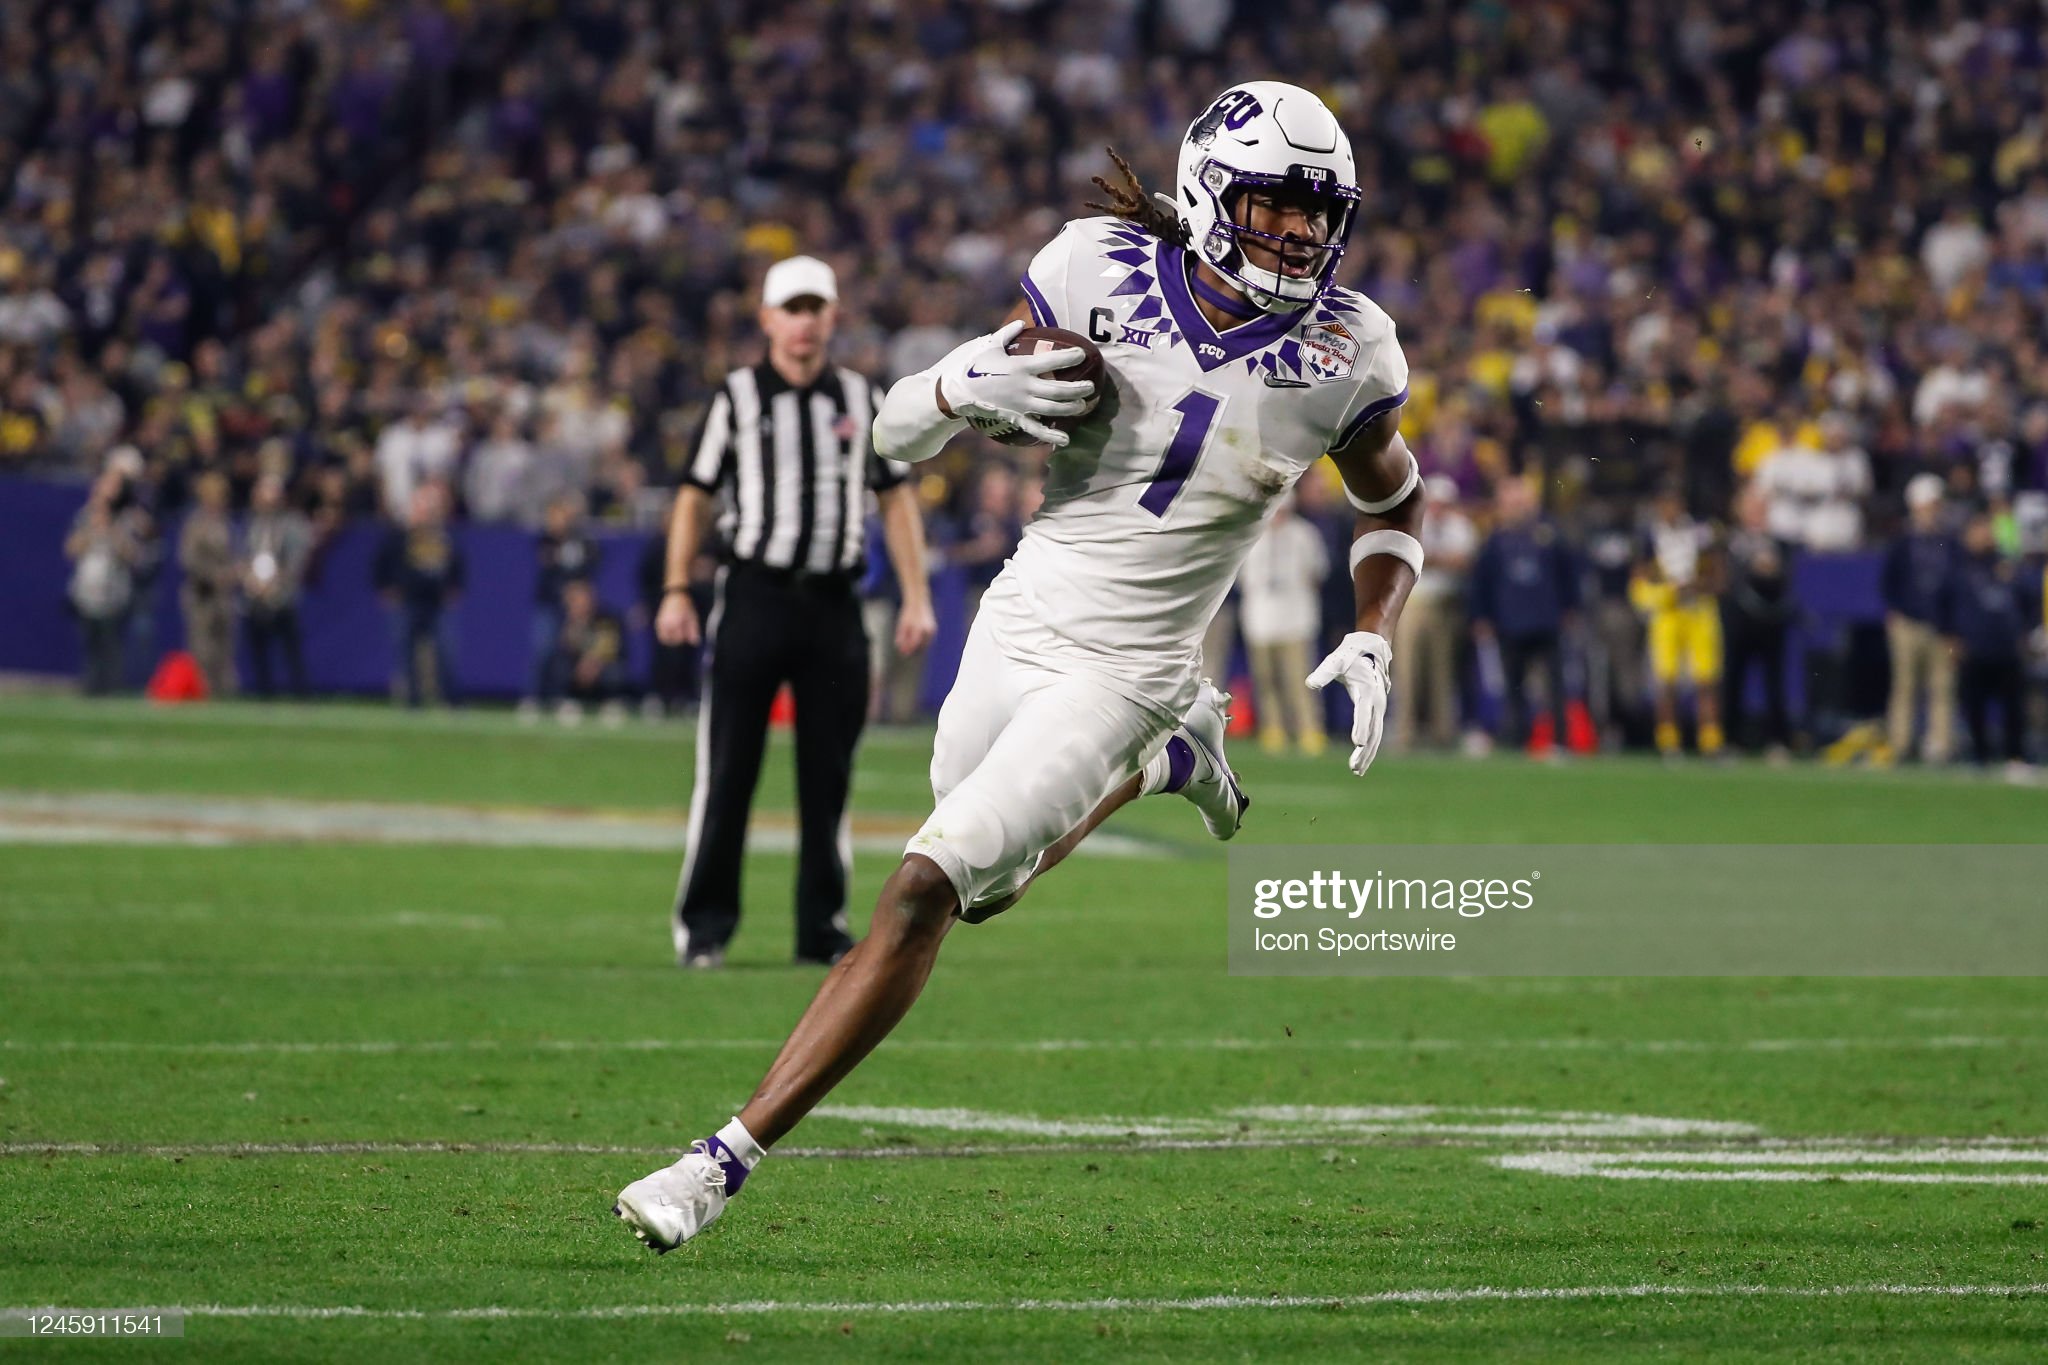 2023 NFL Draft Scouting Report: WR Quentin Johnston, TCU